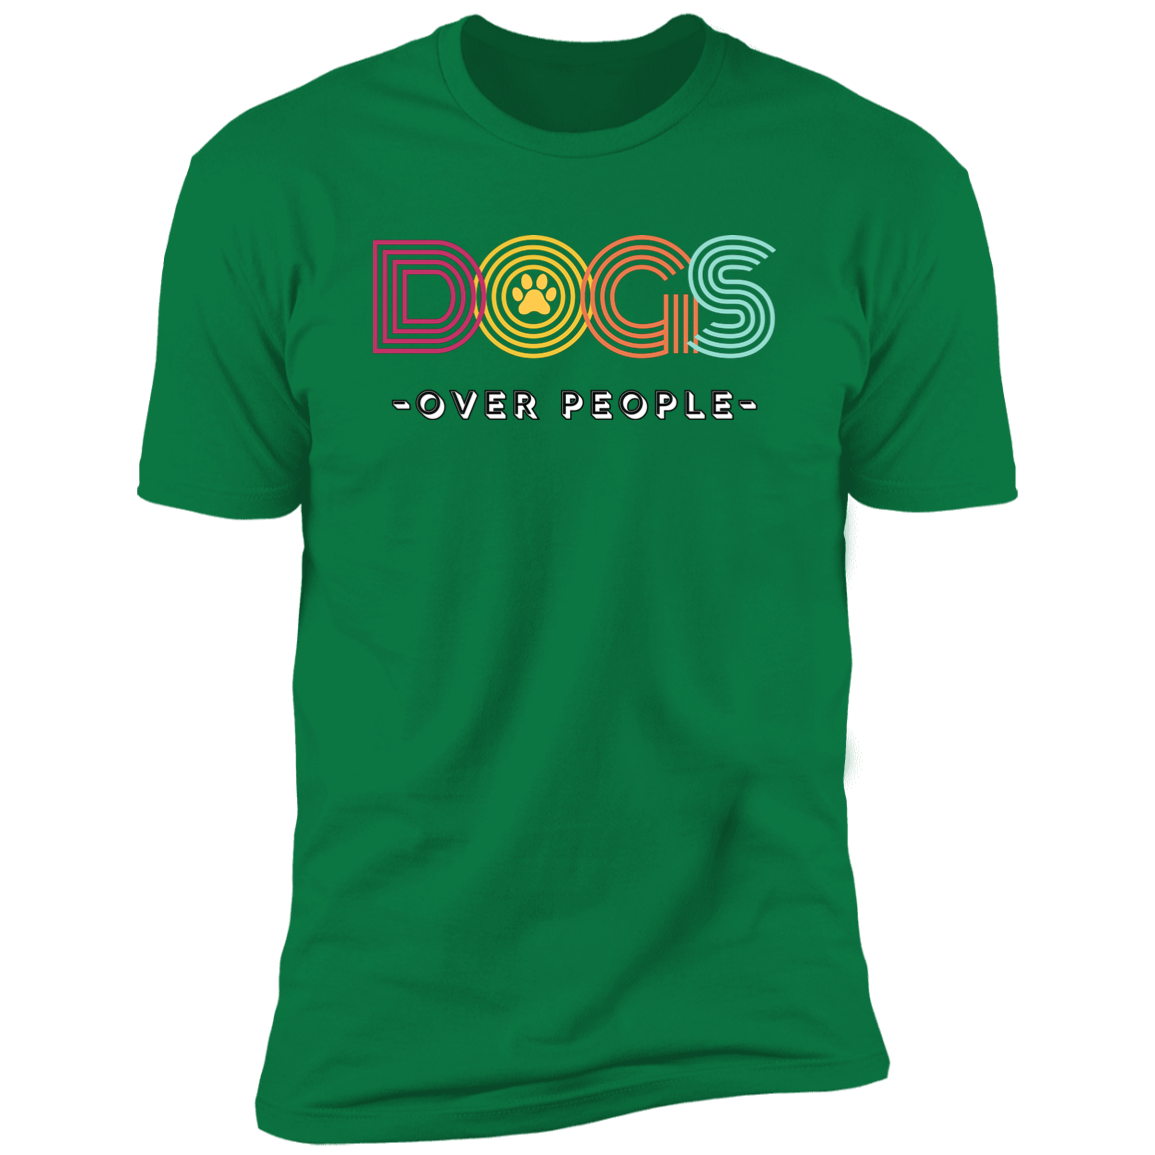 Dogs Over People t-shirt, funny dog shirt for humans, in kelly greeen